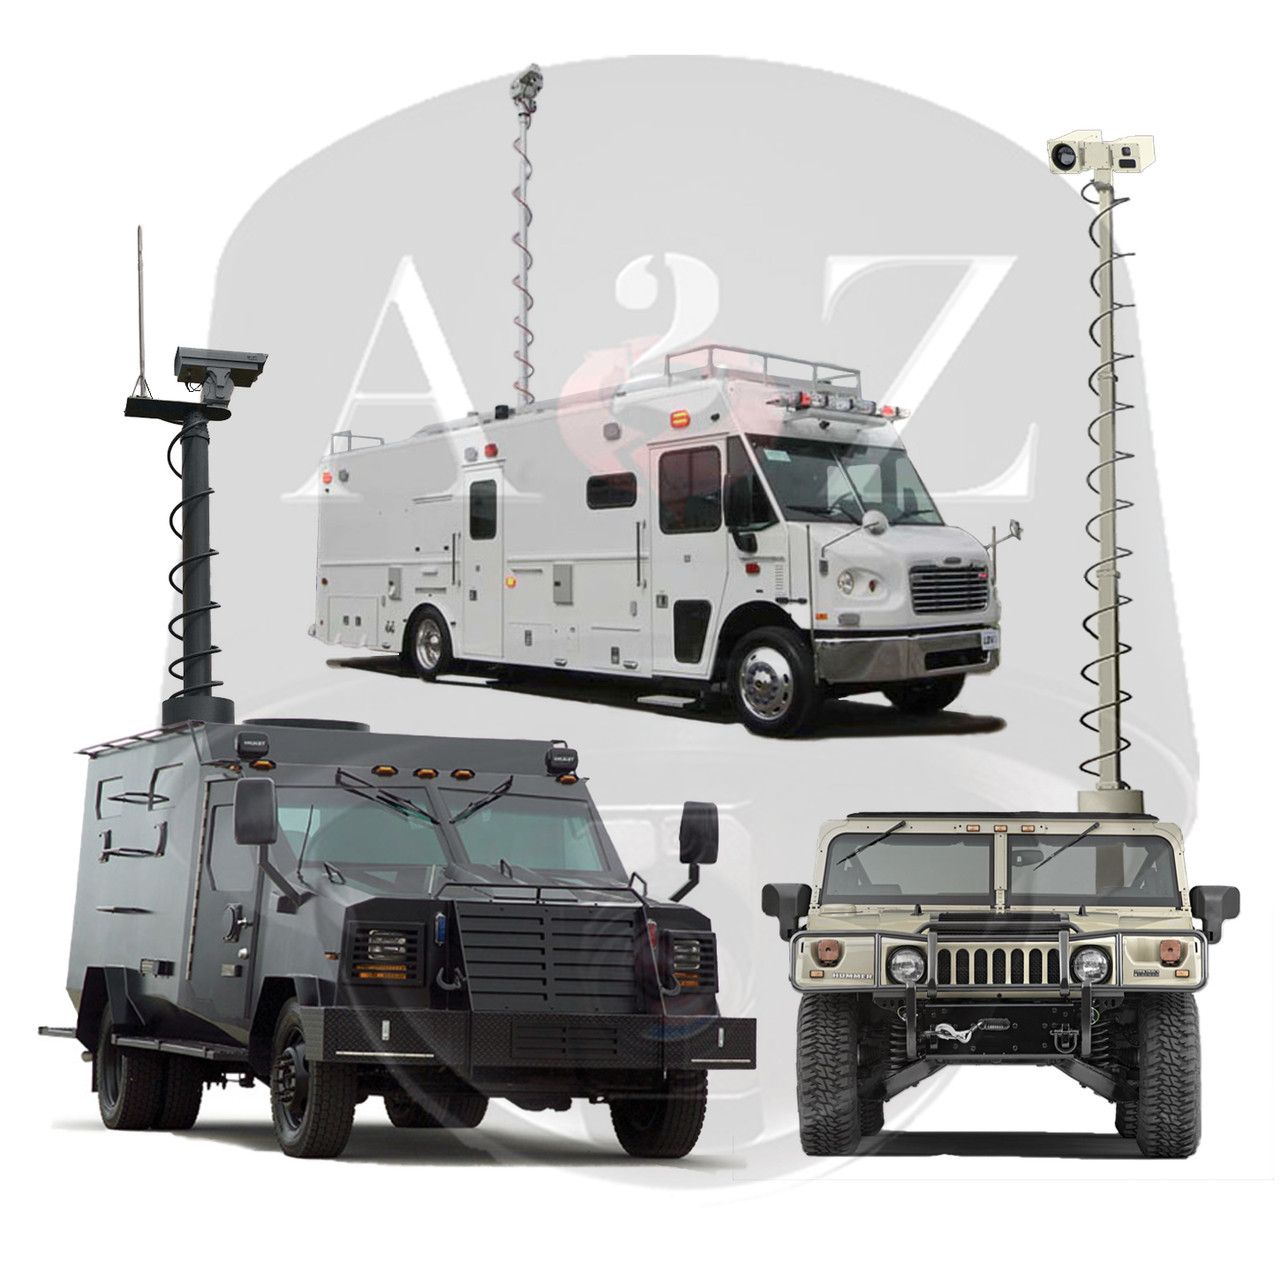 A2Z MSS-VTM Tactical Vehicle Systems Telescopic Masts